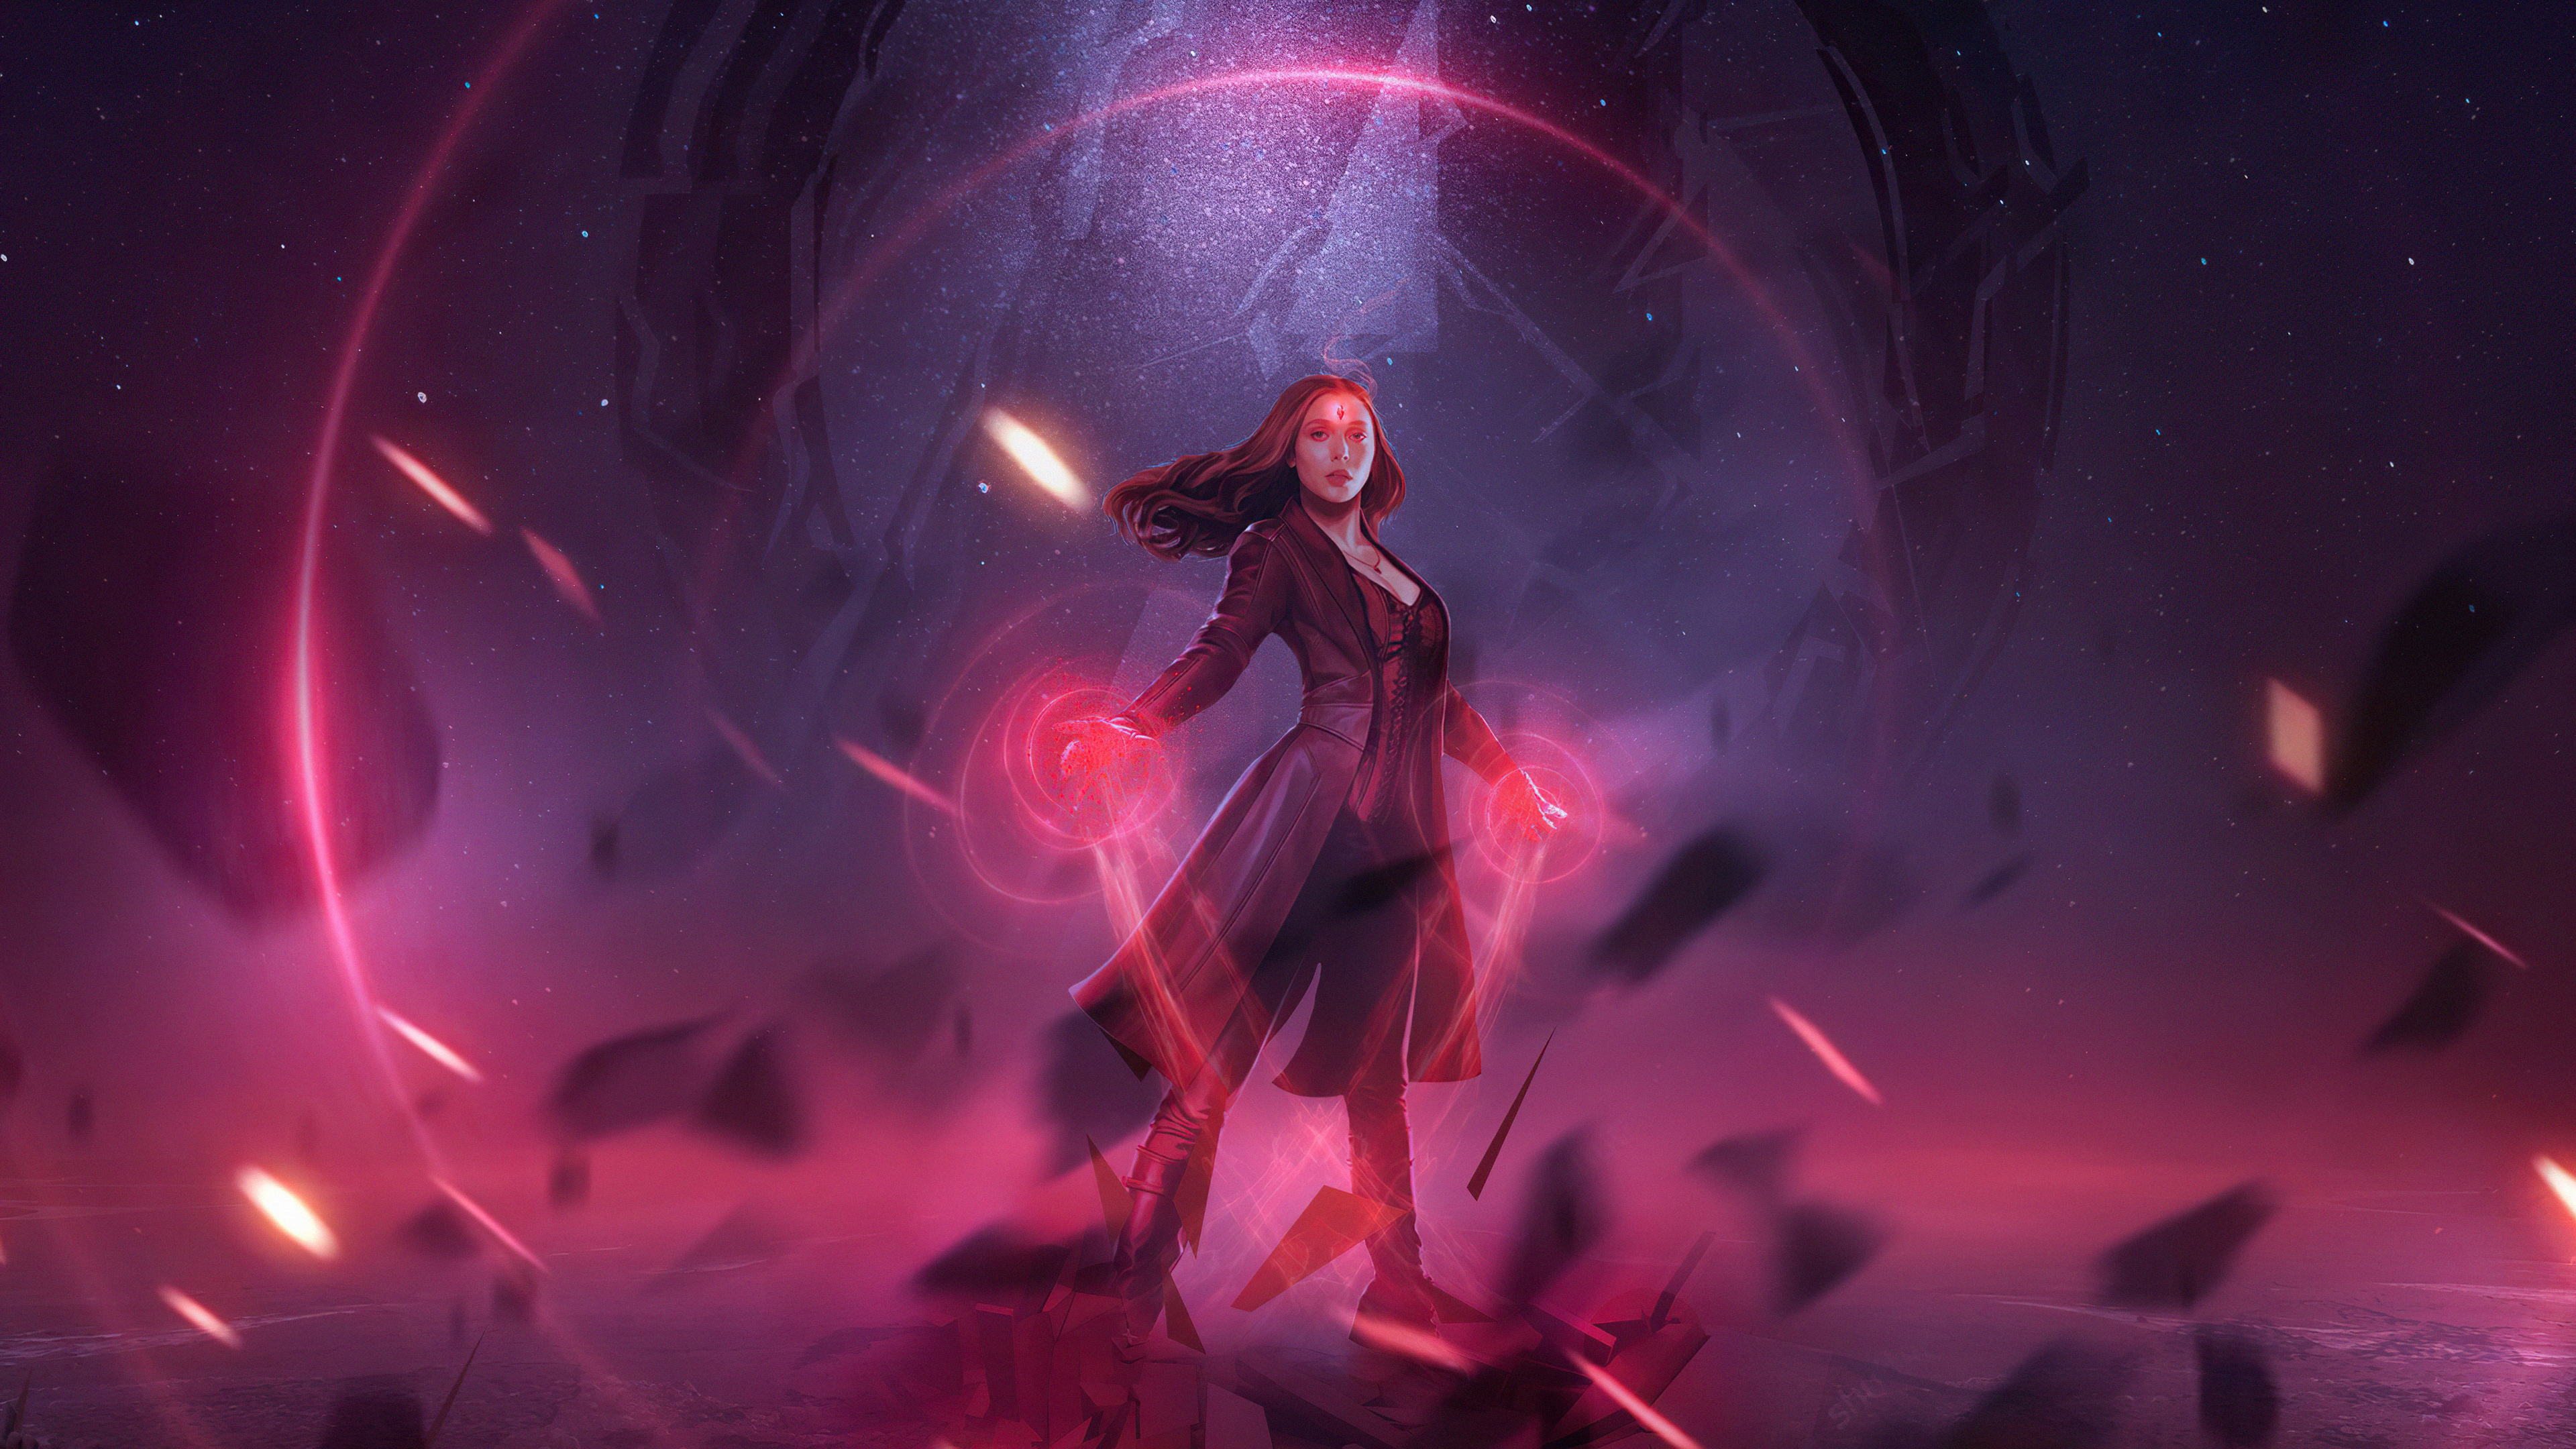 Scarlet Witch Wanda Vision Full Power Wallpaper Wallpaper Popular Scarlet Witch Wanda Vision Full Power Wallpaper Background